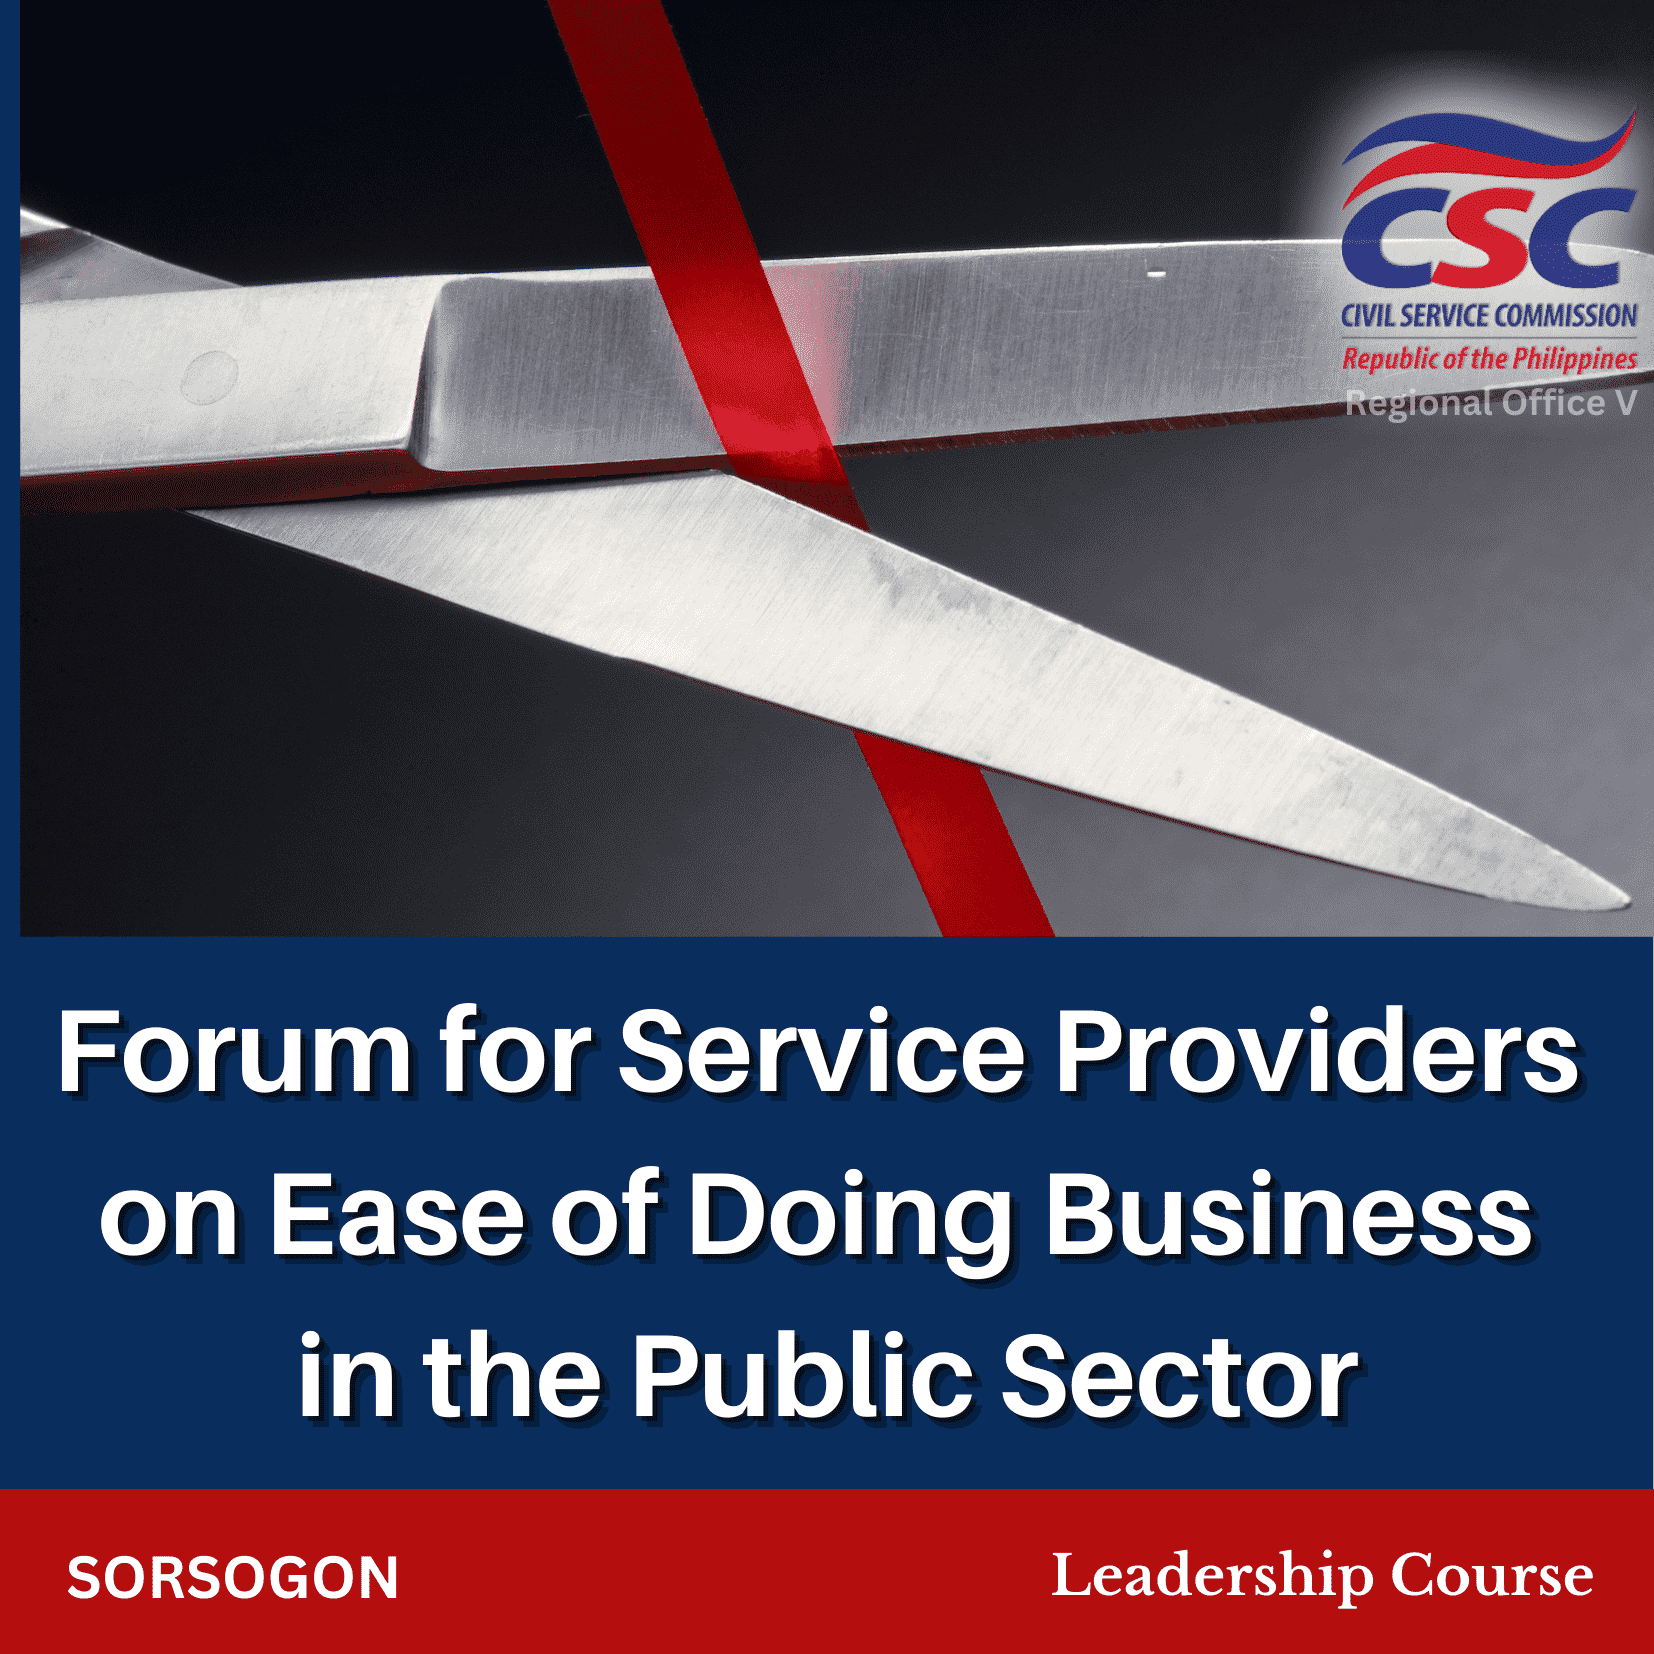 Forum on Ease of Doing Business in the Public Sector for Service Providers (Sorsogon)